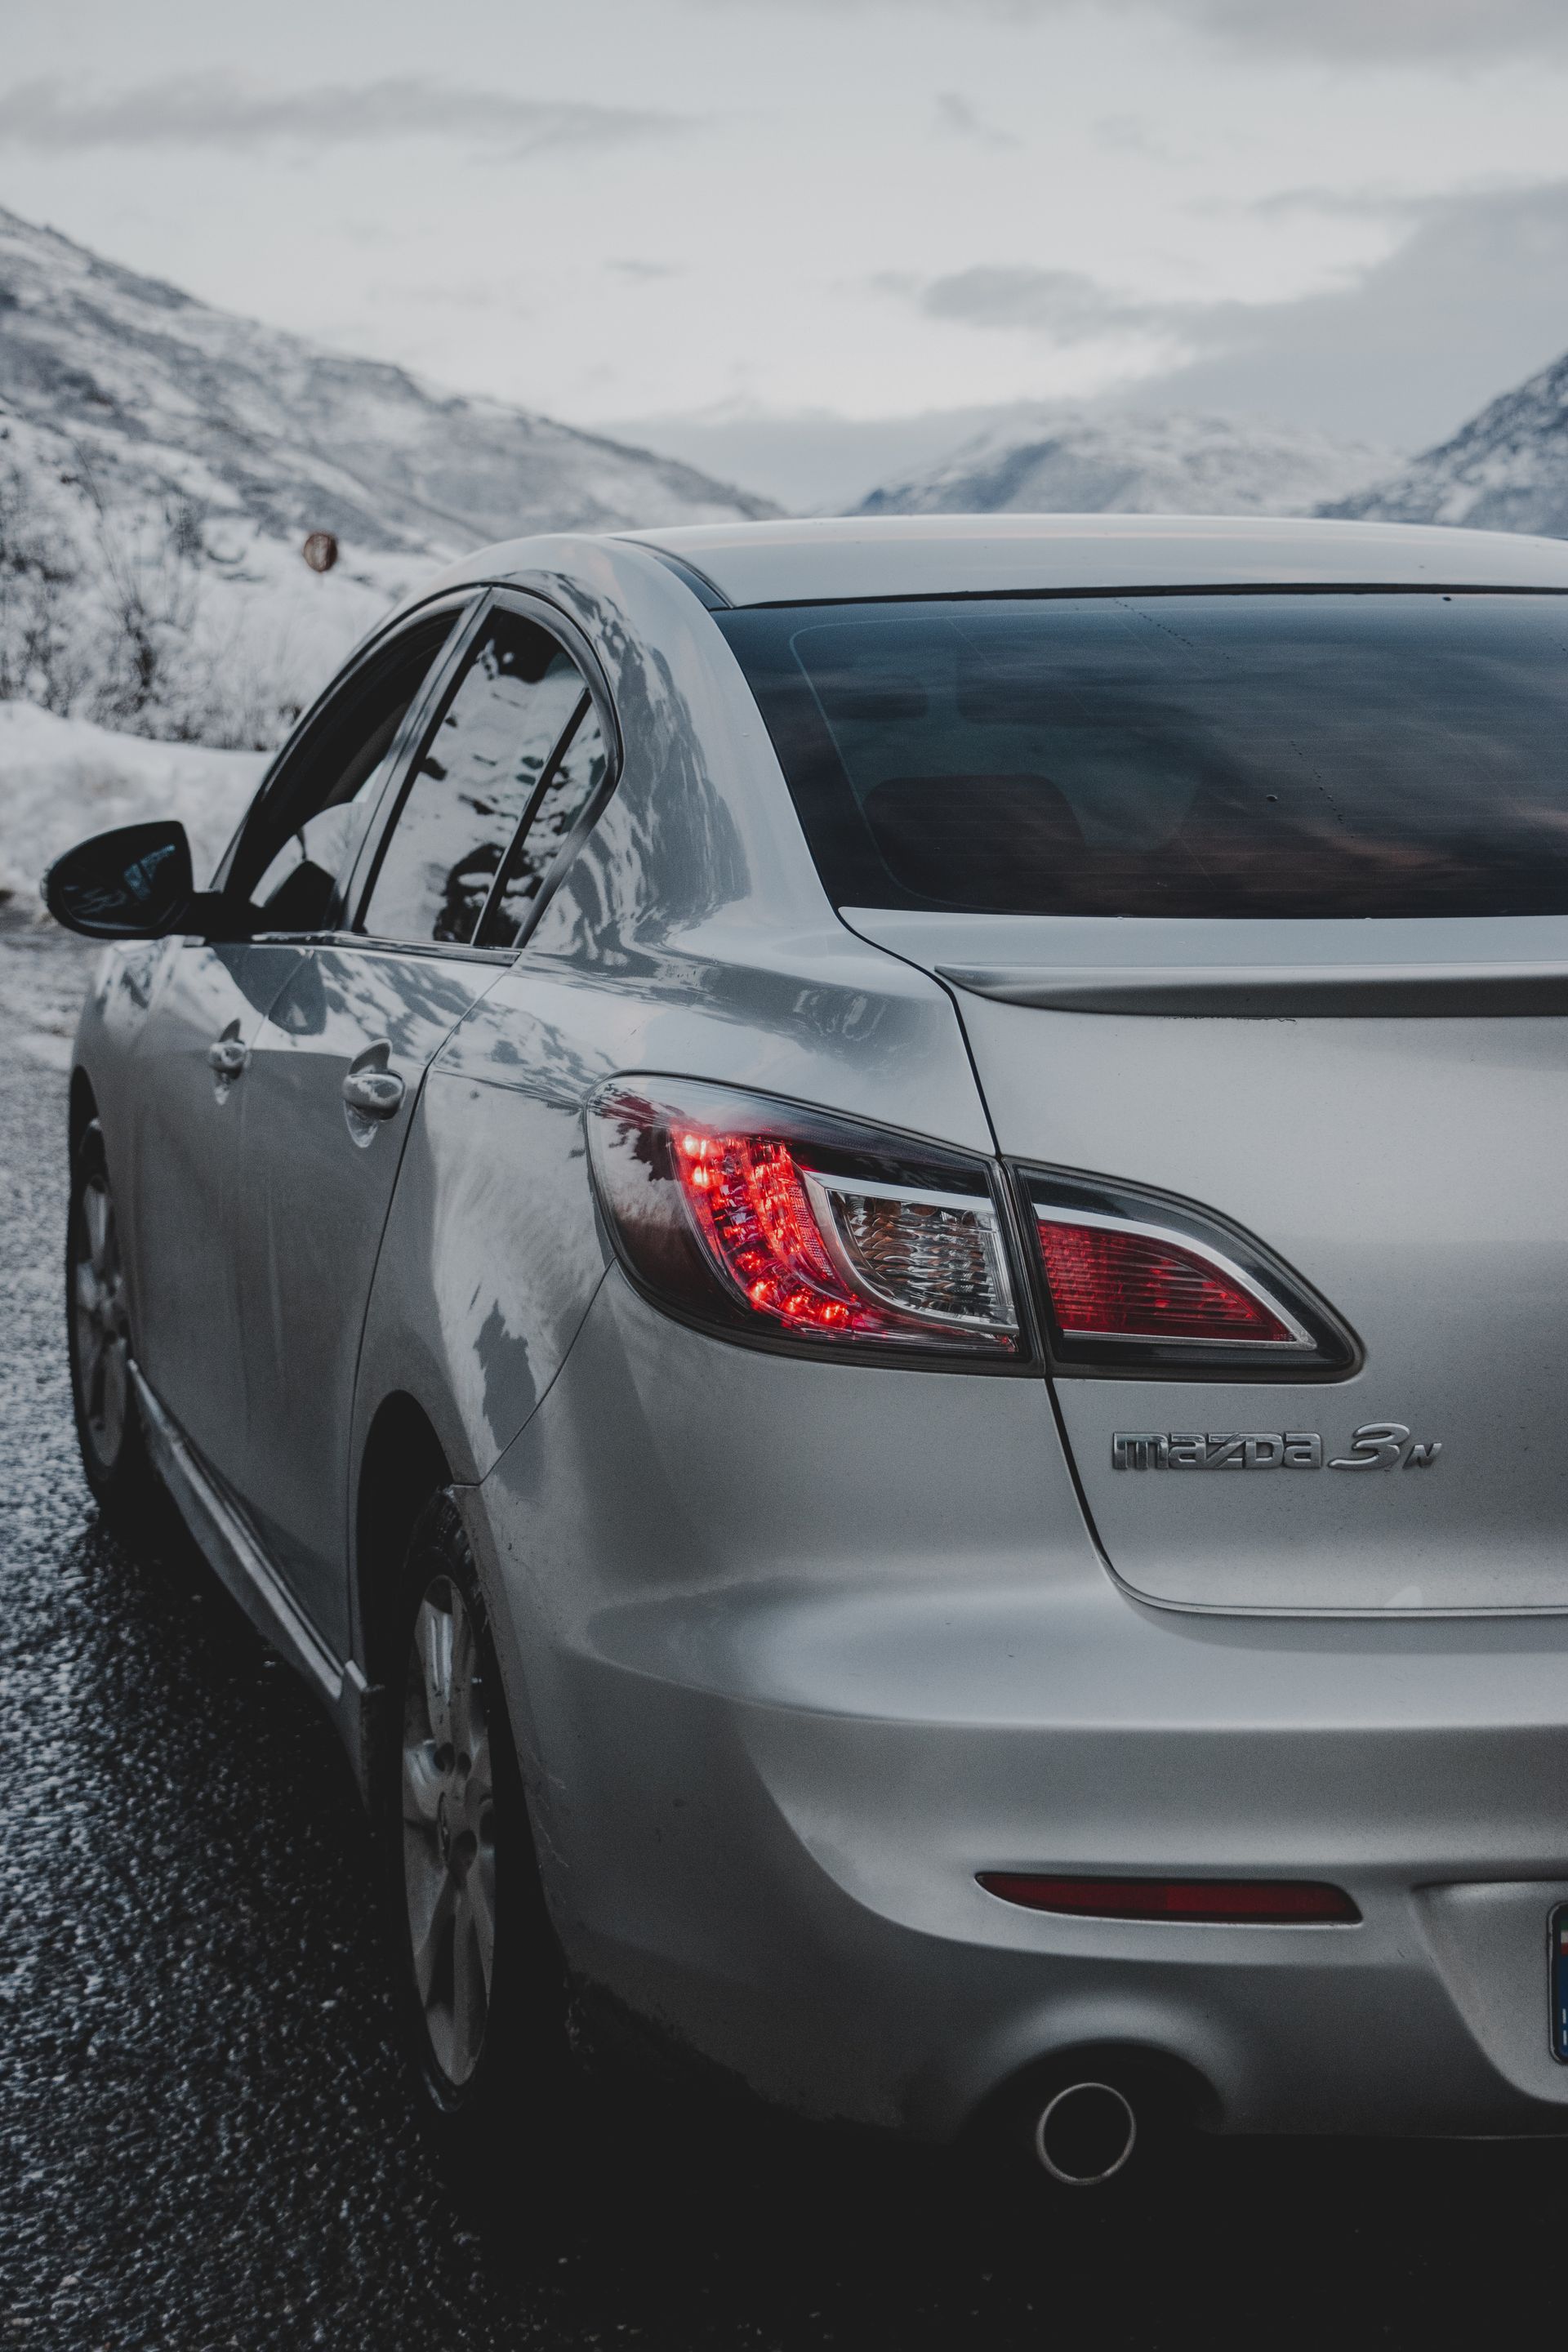 Rear view of a silver Mazda 3 on a snowy road.